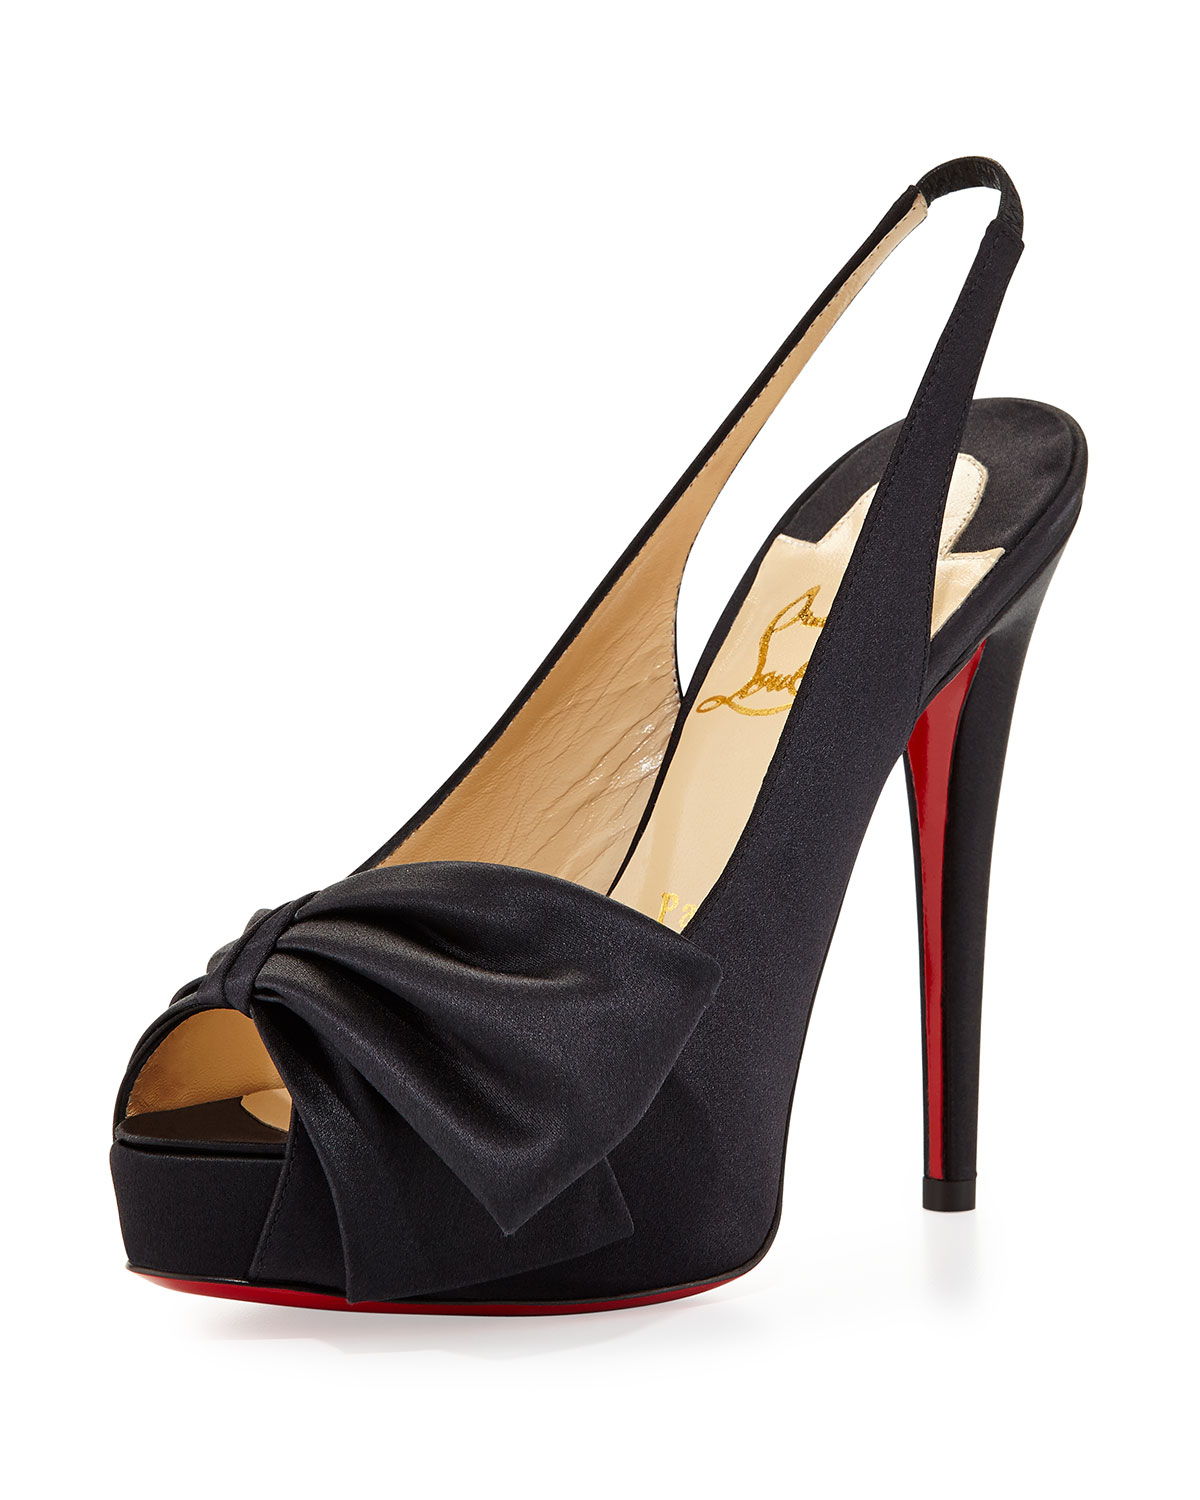 christian louboutin patent leather rounded-toe sandals, best replica